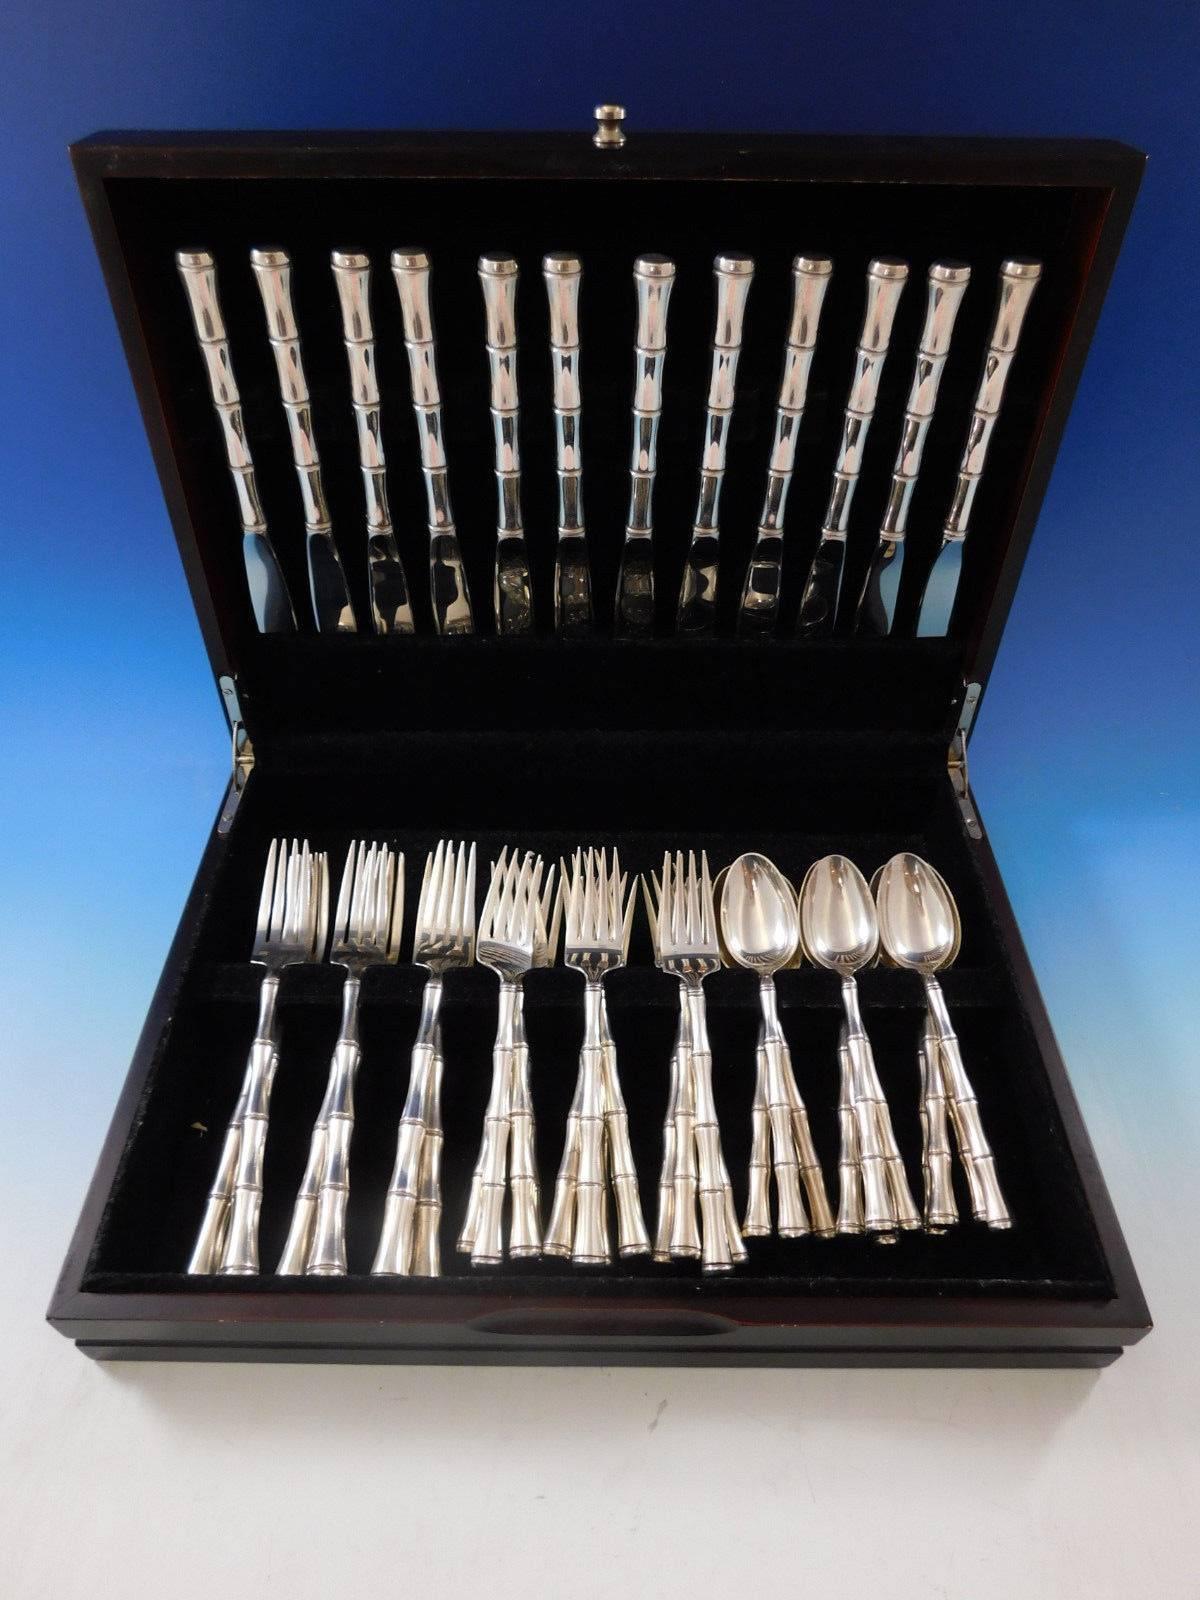 Mandarin by Towle Sterling silver flatware set of 48 pieces. This chinoiserie style flatware service has hollow 3-D bamboo pattern handles. This set includes:

12 knives, 9 1/8